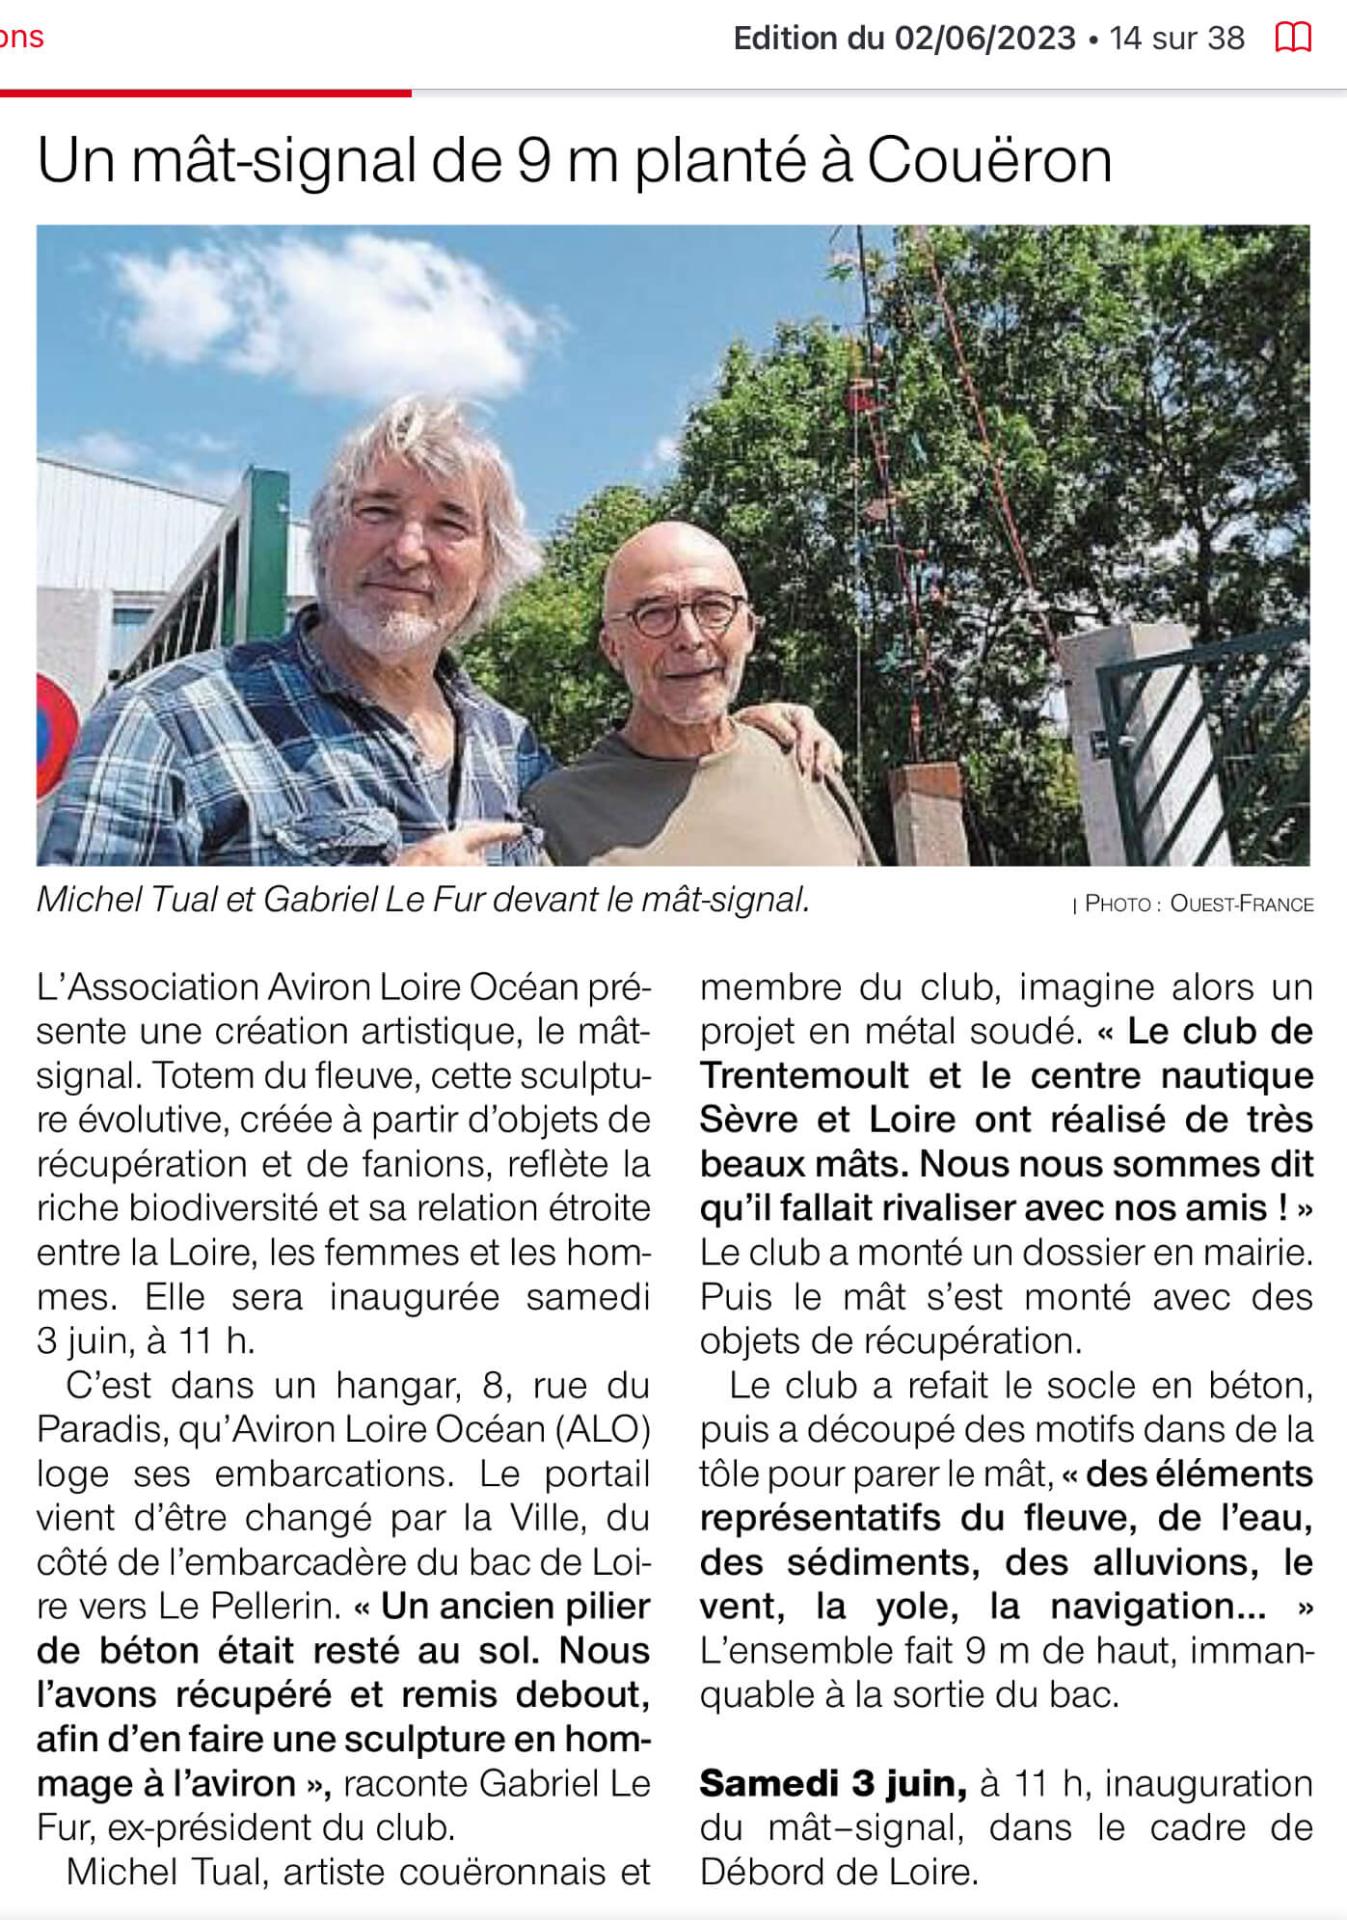 02 06 2023 ouest france